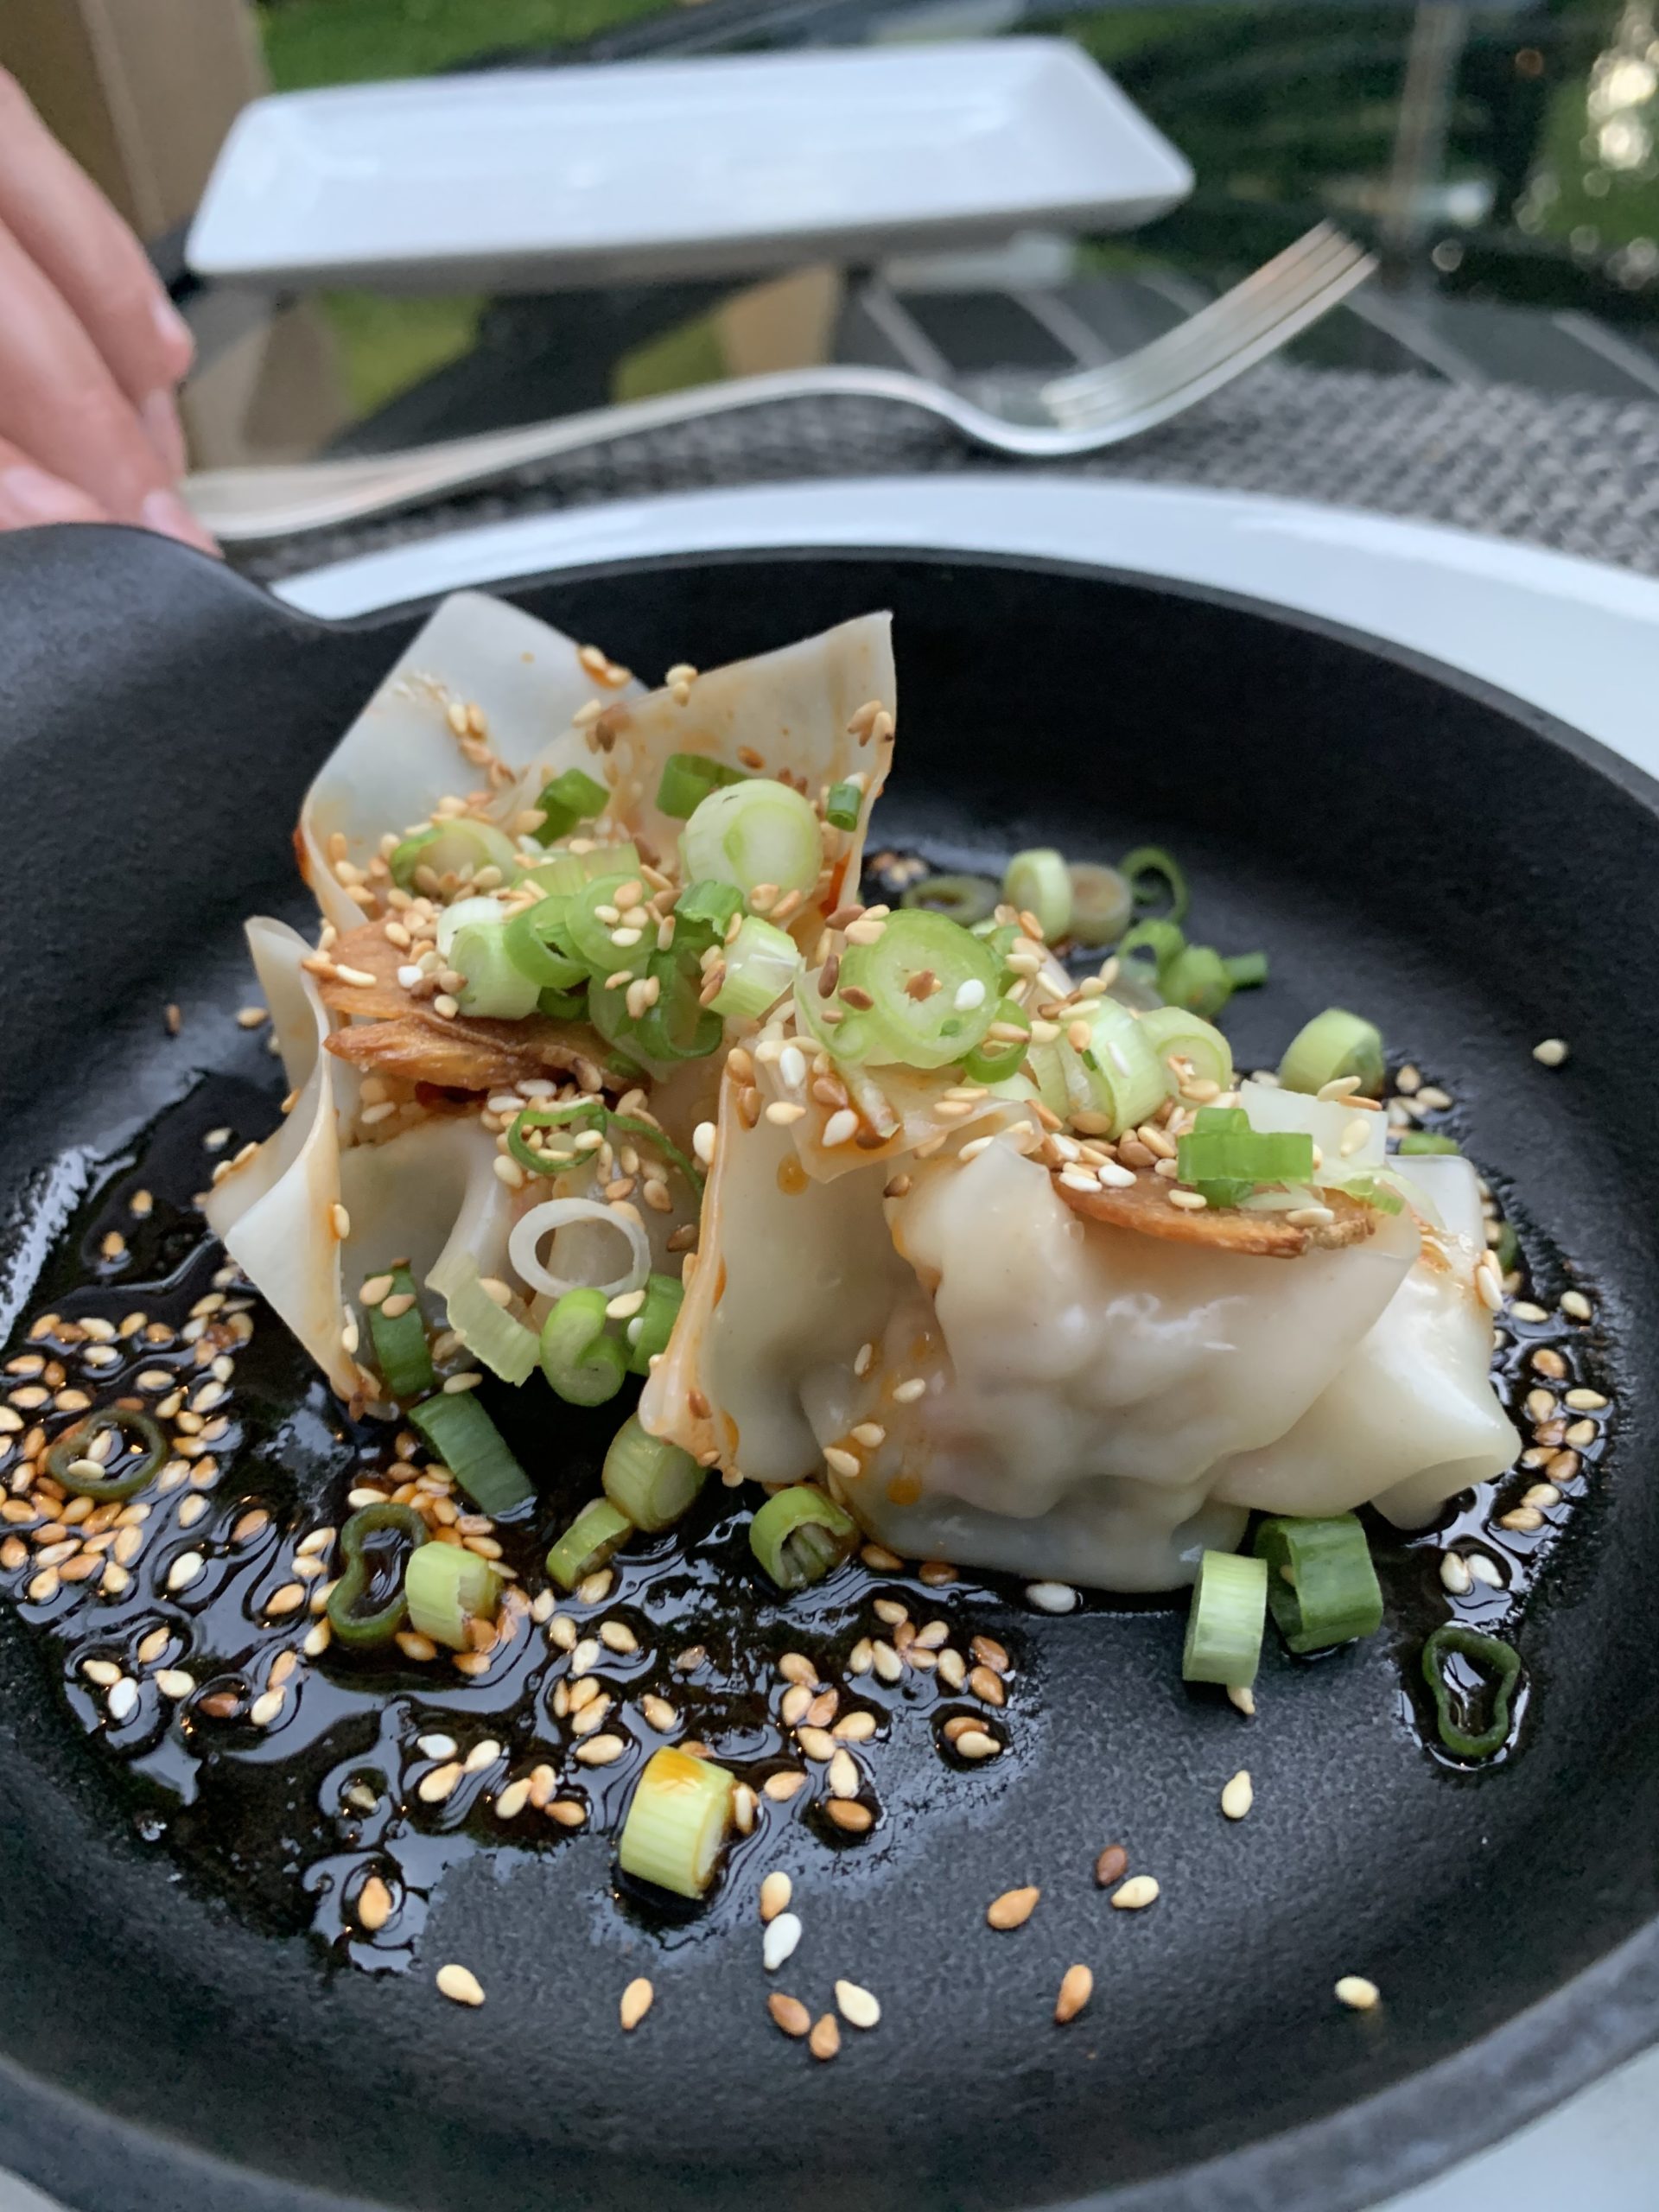 Spicy rock shrimp shumai with crisp garlic, chilies, sesame and scallions is one of the menu items Chef Michael Rozzi belives may have lasting power on a menu he plans to evolve throughout the season based what can be found at local farmstands and fish markets. 